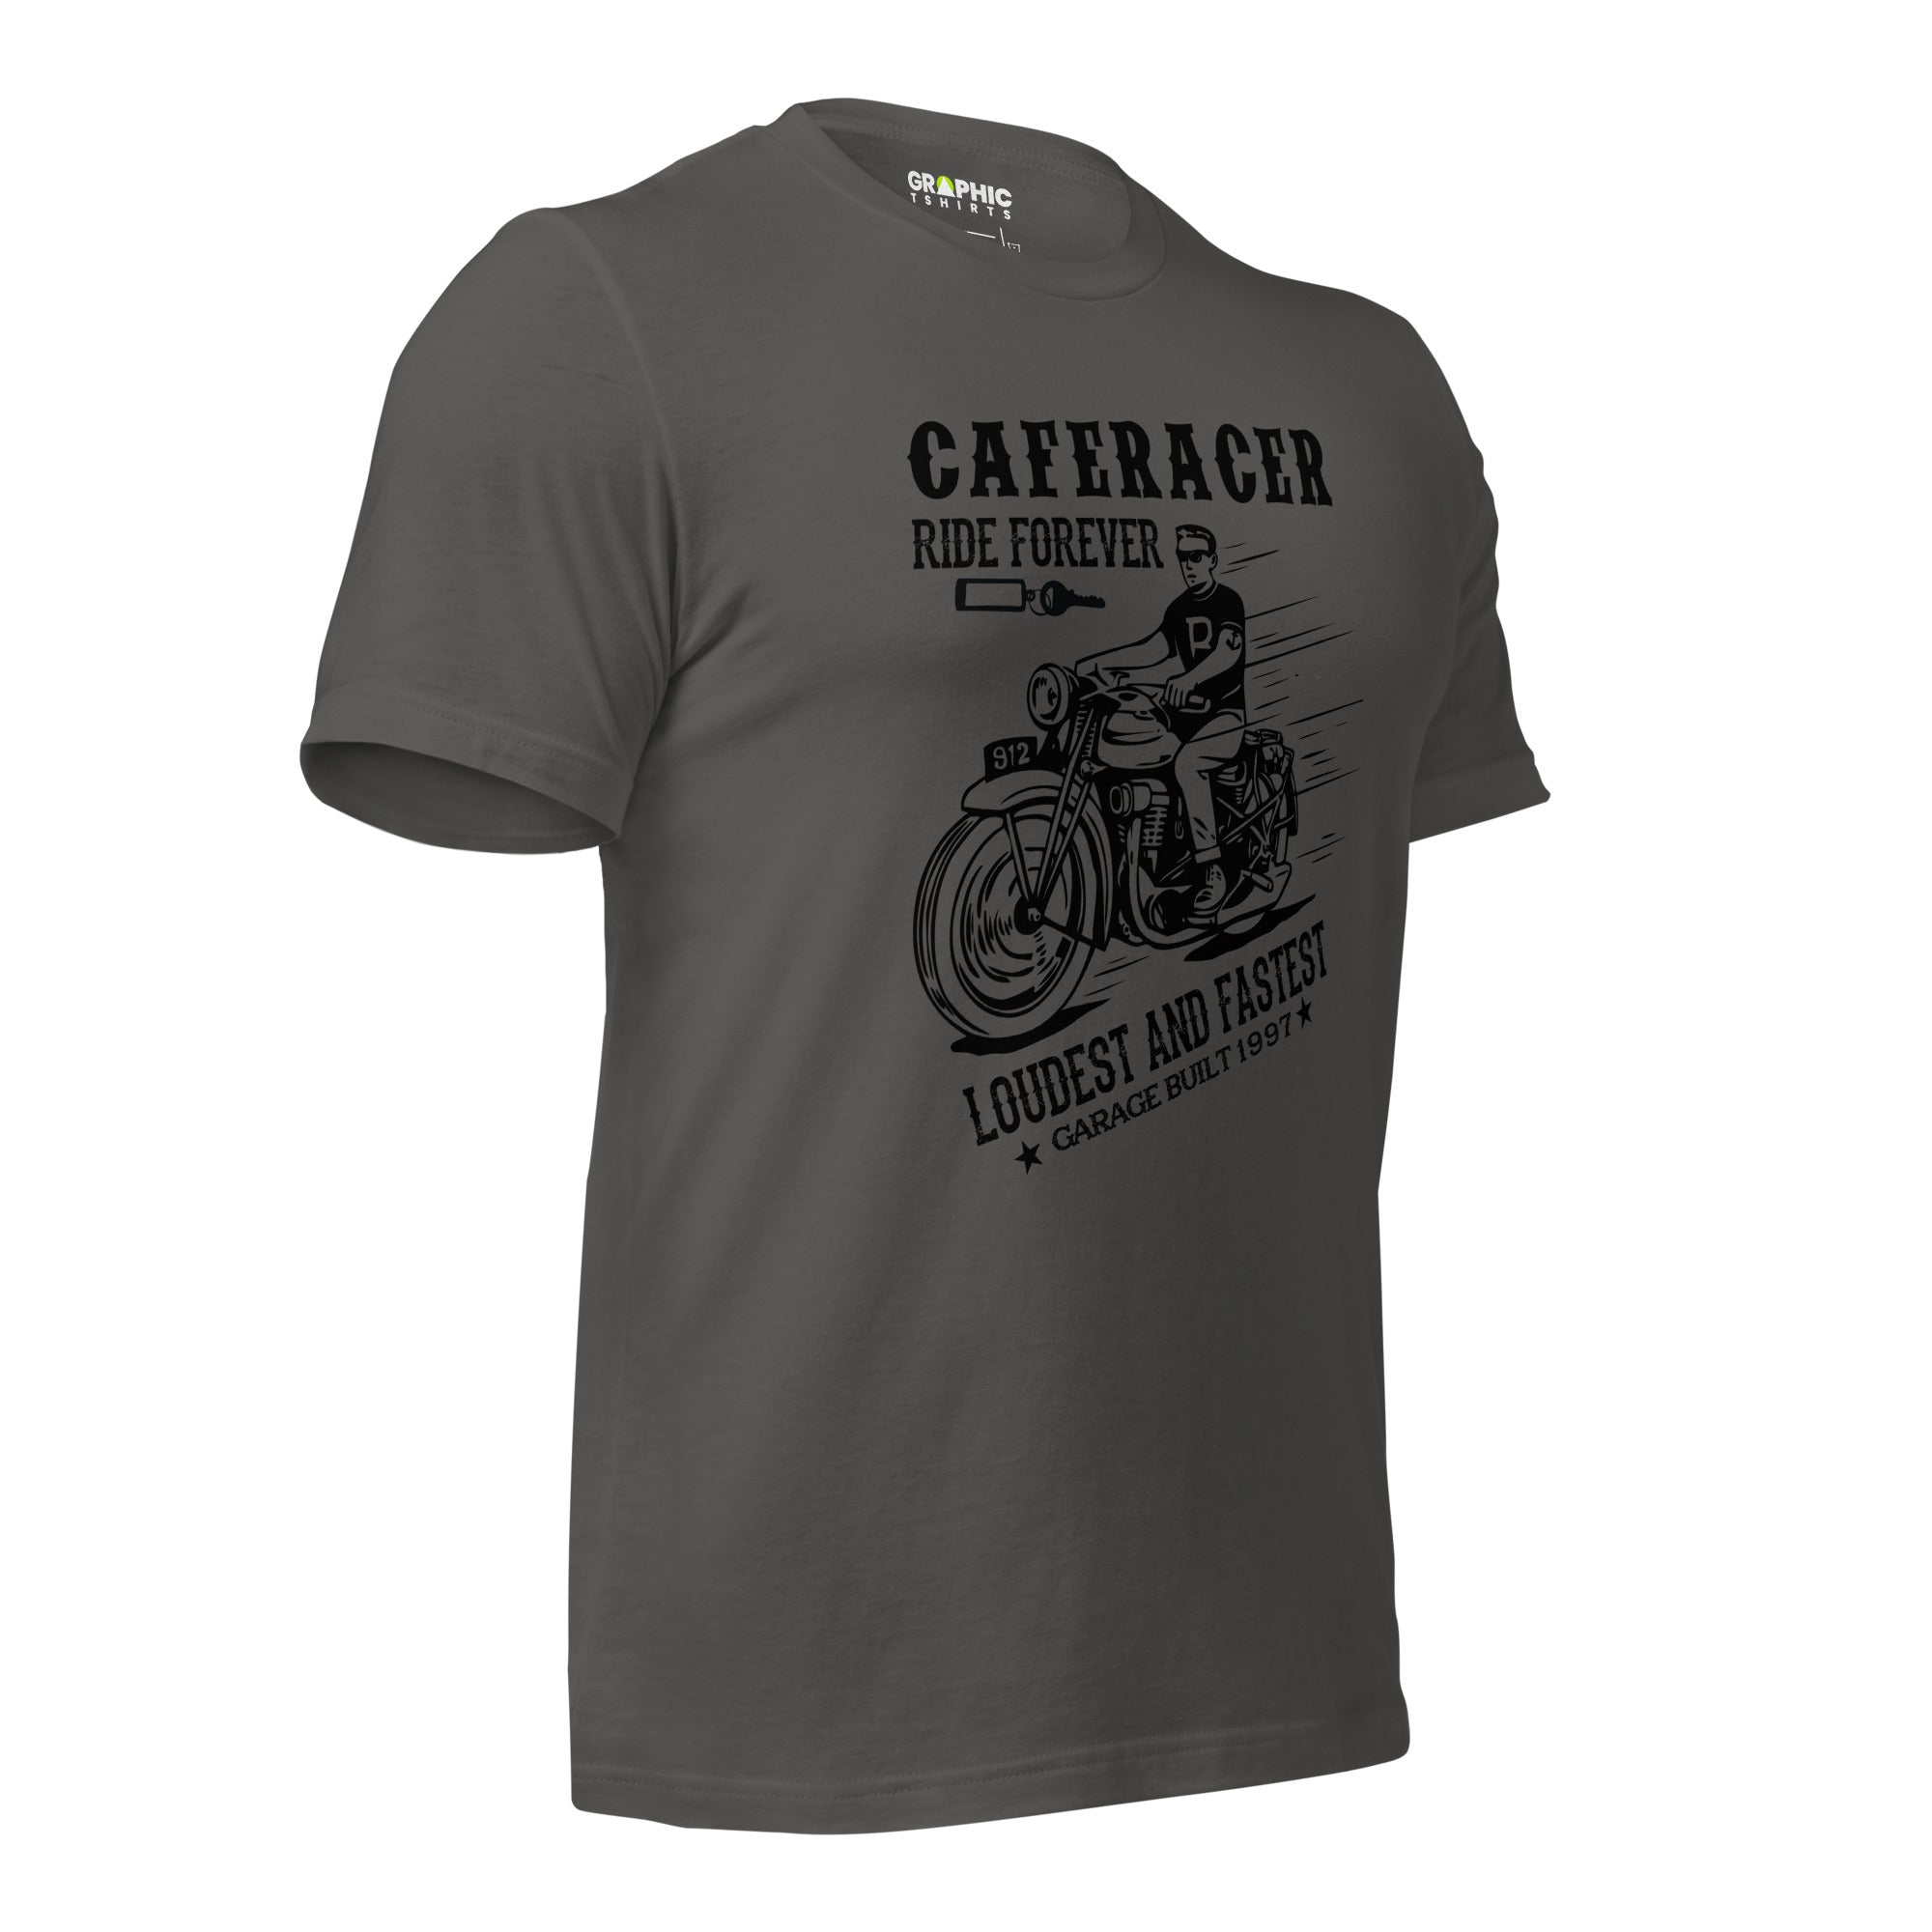 Unisex Staple T-Shirt - Cafe Racer Ride Forever Loudest And Fastest Garage Built 1997 - GRAPHIC T-SHIRTS